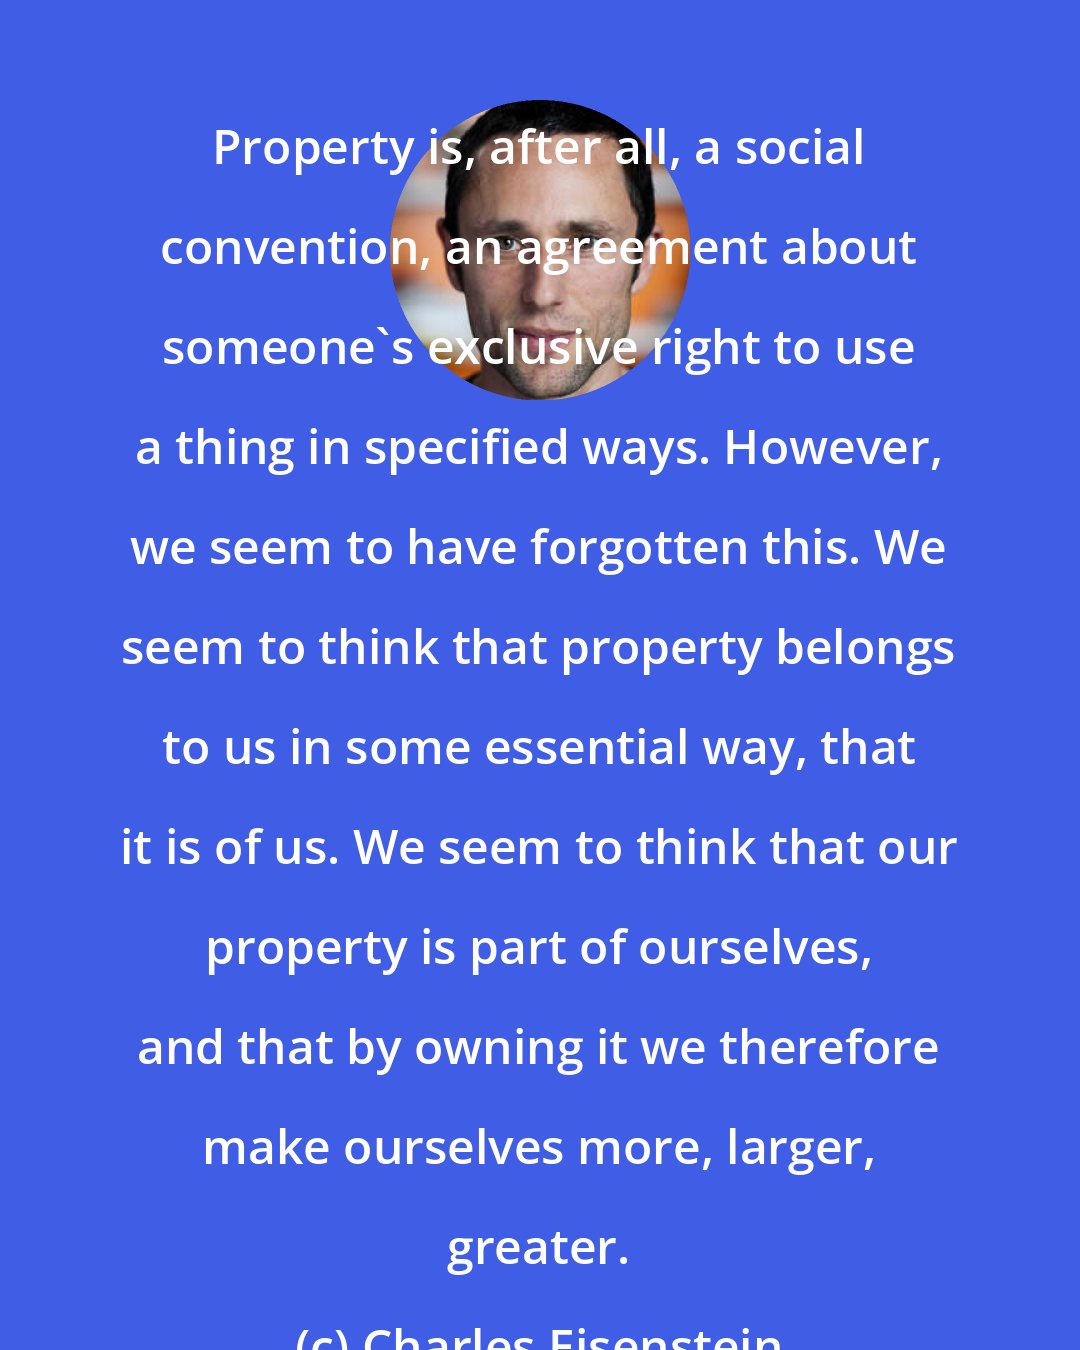 Charles Eisenstein: Property is, after all, a social convention, an agreement about someone's exclusive right to use a thing in specified ways. However, we seem to have forgotten this. We seem to think that property belongs to us in some essential way, that it is of us. We seem to think that our property is part of ourselves, and that by owning it we therefore make ourselves more, larger, greater.